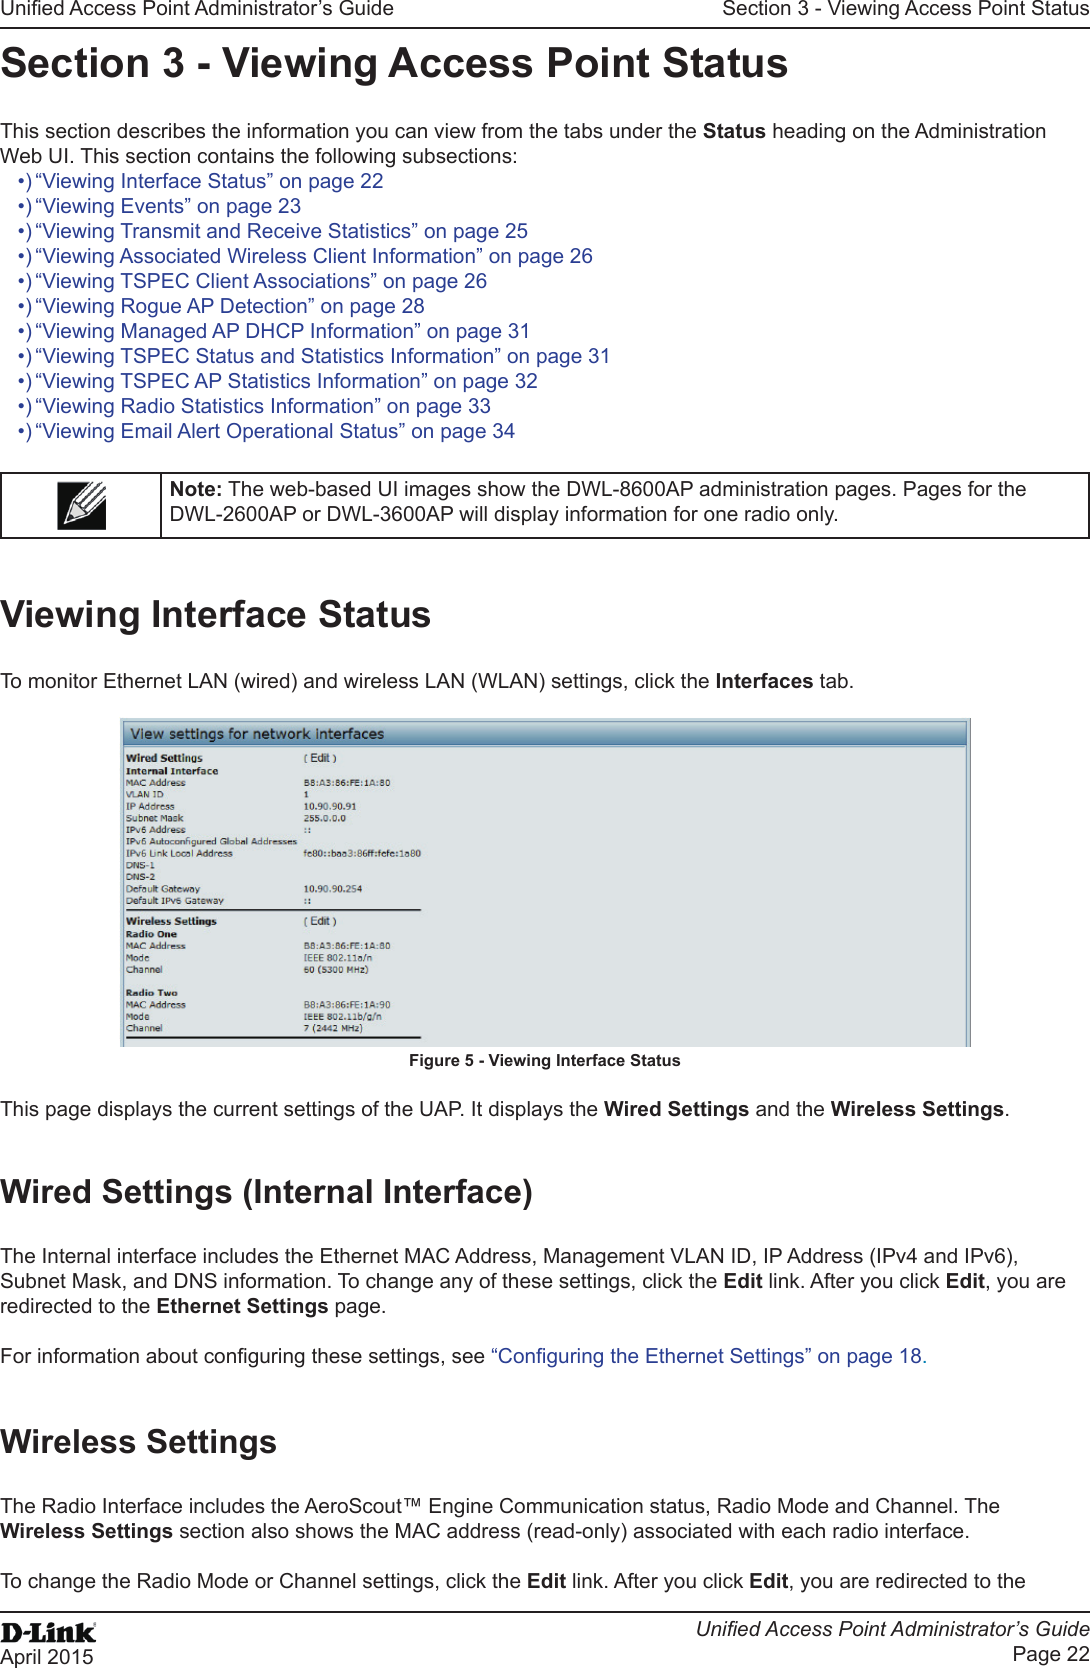 Unied Access Point Administrator’s GuideUnied Access Point Administrator’s GuidePage 22April 2015Section 3 - Viewing Access Point StatusSection 3 - Viewing Access Point StatusThis section describes the information you can view from the tabs under the Status heading on the Administration Web UI. This section contains the following subsections:•) “Viewing Interface Status” on page 22•) “Viewing Events” on page 23•) “Viewing Transmit and Receive Statistics” on page 25•) “Viewing Associated Wireless Client Information” on page 26•) “Viewing TSPEC Client Associations” on page 26•) “Viewing Rogue AP Detection” on page 28•) “Viewing Managed AP DHCP Information” on page 31•) “Viewing TSPEC Status and Statistics Information” on page 31•) “Viewing TSPEC AP Statistics Information” on page 32•) “Viewing Radio Statistics Information” on page 33•) “Viewing Email Alert Operational Status” on page 34Note: The web-based UI images show the DWL-8600AP administration pages. Pages for the DWL-2600AP or DWL-3600AP will display information for one radio only.Viewing Interface StatusTo monitor Ethernet LAN (wired) and wireless LAN (WLAN) settings, click the Interfaces tab.Figure 5 - Viewing Interface StatusThis page displays the current settings of the UAP. It displays the Wired Settings and the Wireless Settings.Wired Settings (Internal Interface)The Internal interface includes the Ethernet MAC Address, Management VLAN ID, IP Address (IPv4 and IPv6), Subnet Mask, and DNS information. To change any of these settings, click the Edit link. After you click Edit, you are redirected to the Ethernet Settings page.For information about conguring these settings, see “Conguring the Ethernet Settings” on page 18.Wireless SettingsThe Radio Interface includes the AeroScout™ Engine Communication status, Radio Mode and Channel. The Wireless Settings section also shows the MAC address (read-only) associated with each radio interface. To change the Radio Mode or Channel settings, click the Edit link. After you click Edit, you are redirected to the 